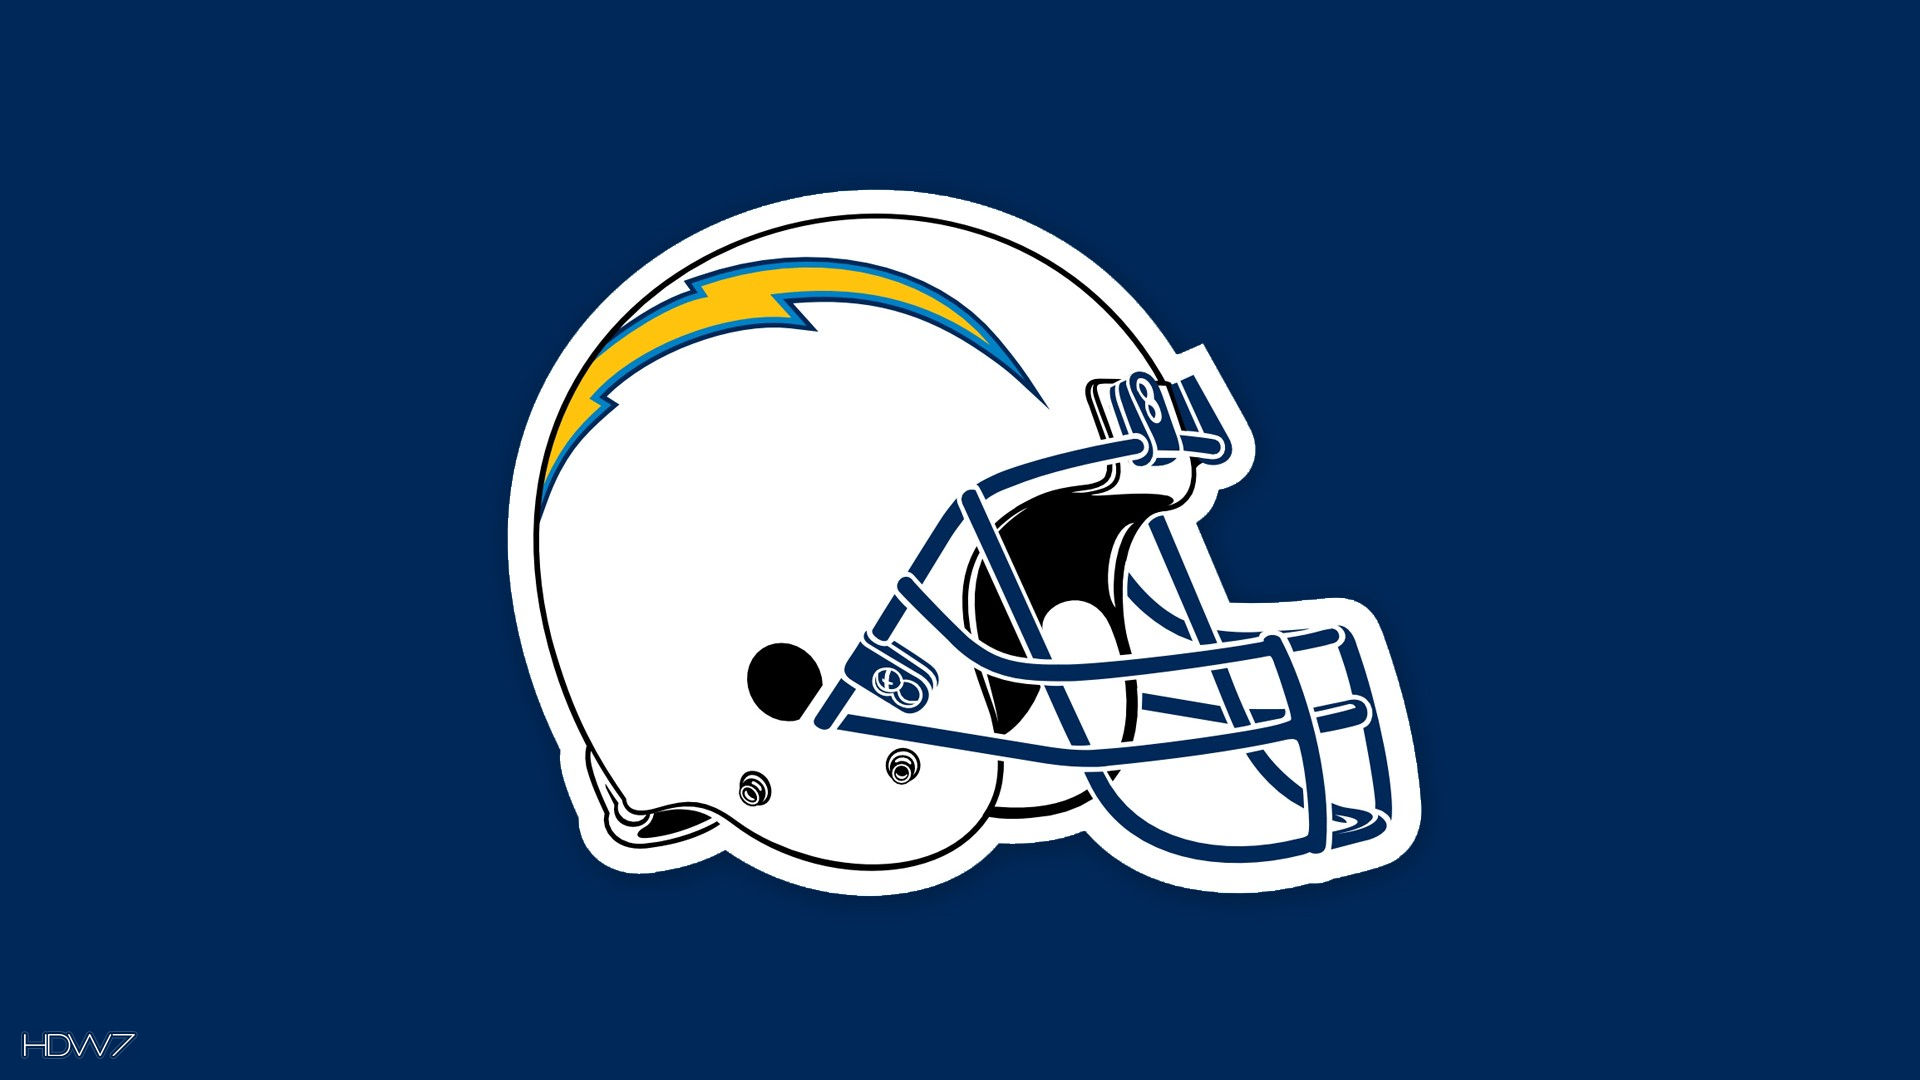 wallpaper name san diego chargers logo jpg wallpaper added may 24 2015